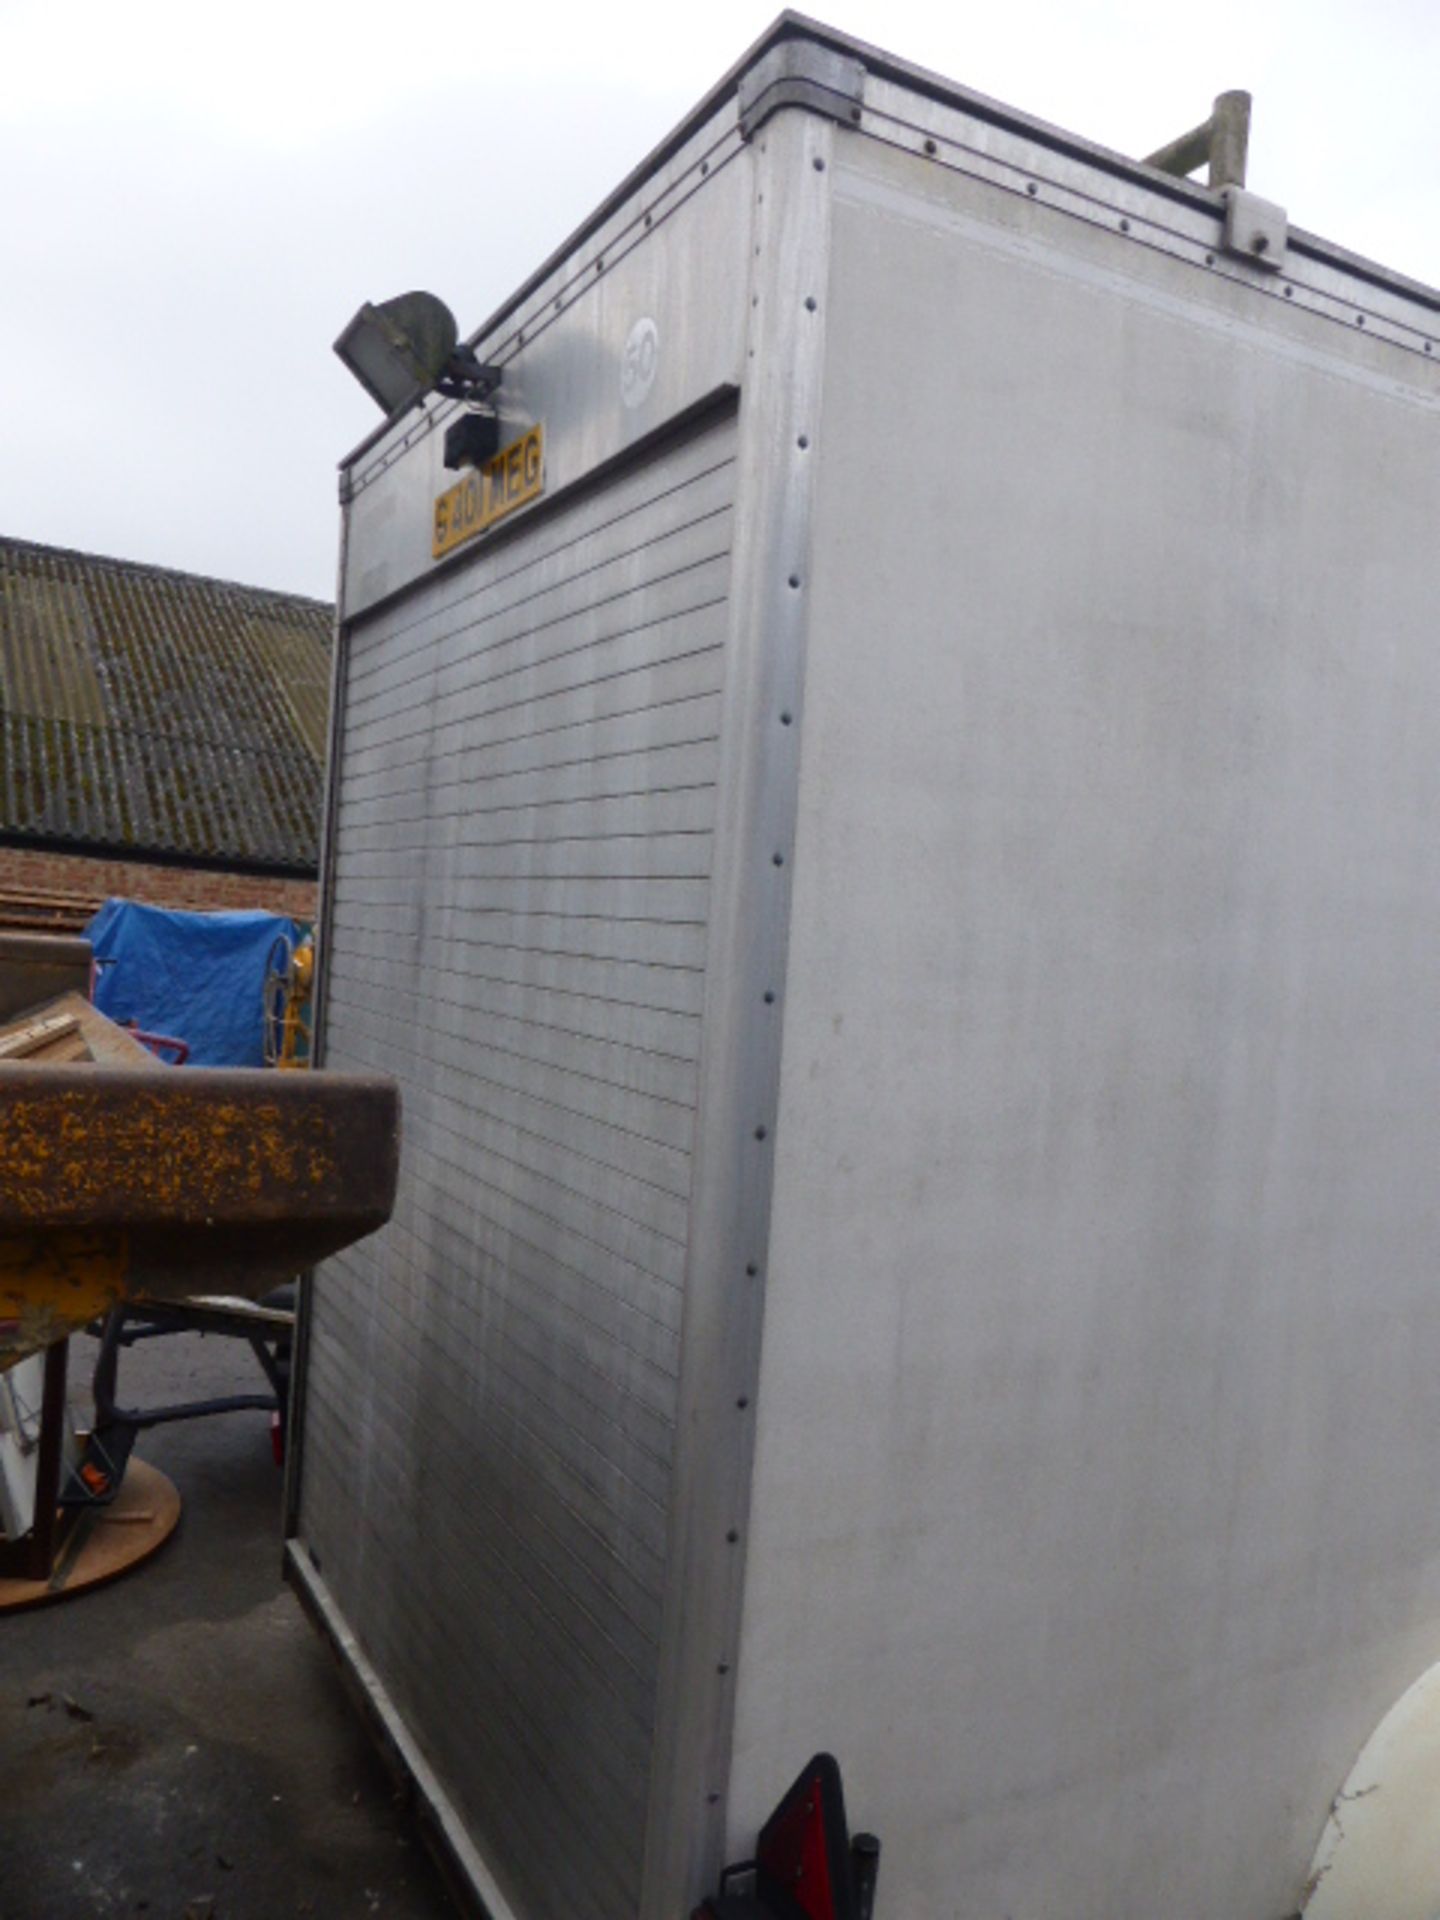 13' x 5' twin axle box trailer used recently as site office with roller door to rear, side door.. - Image 3 of 3